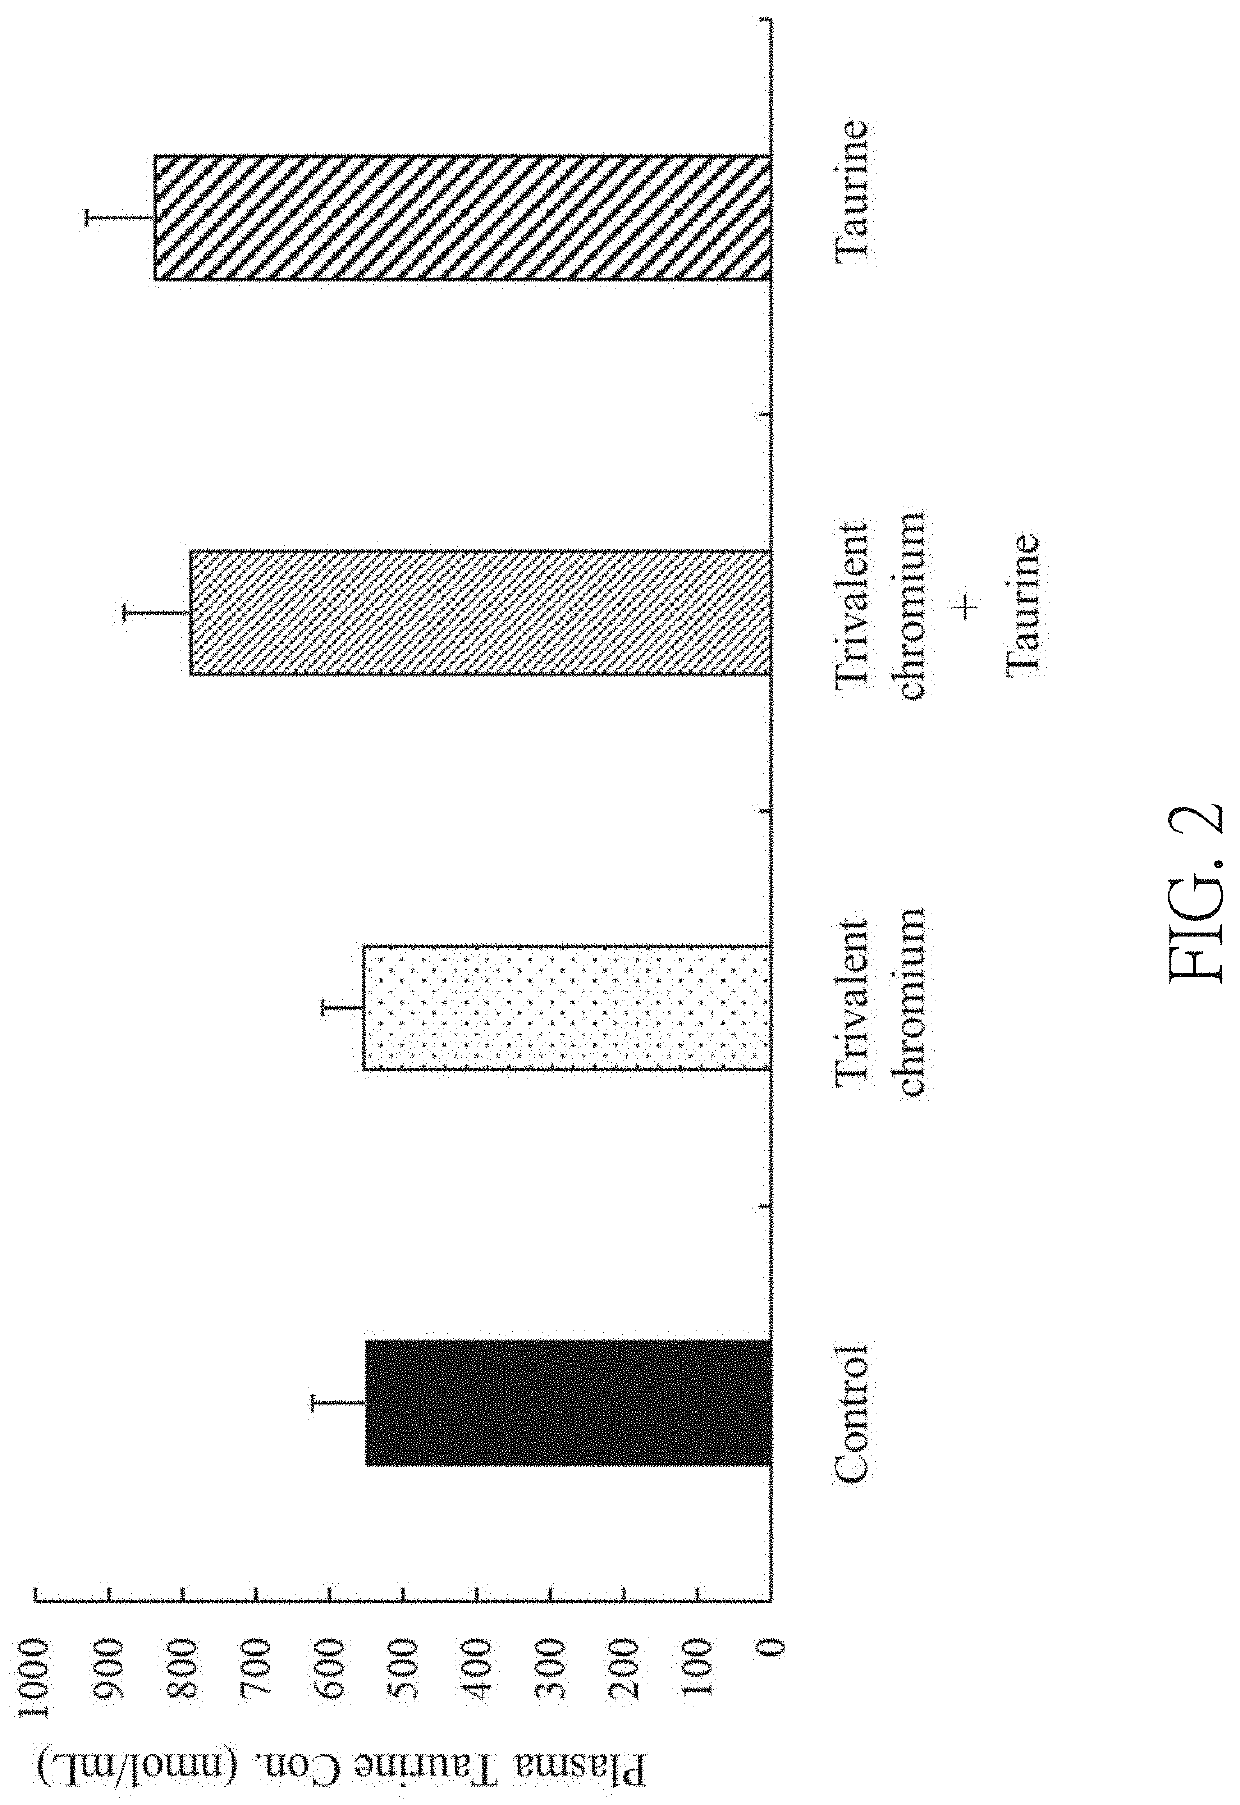 Method for promoting lipid metabolism or assisting in body weight control